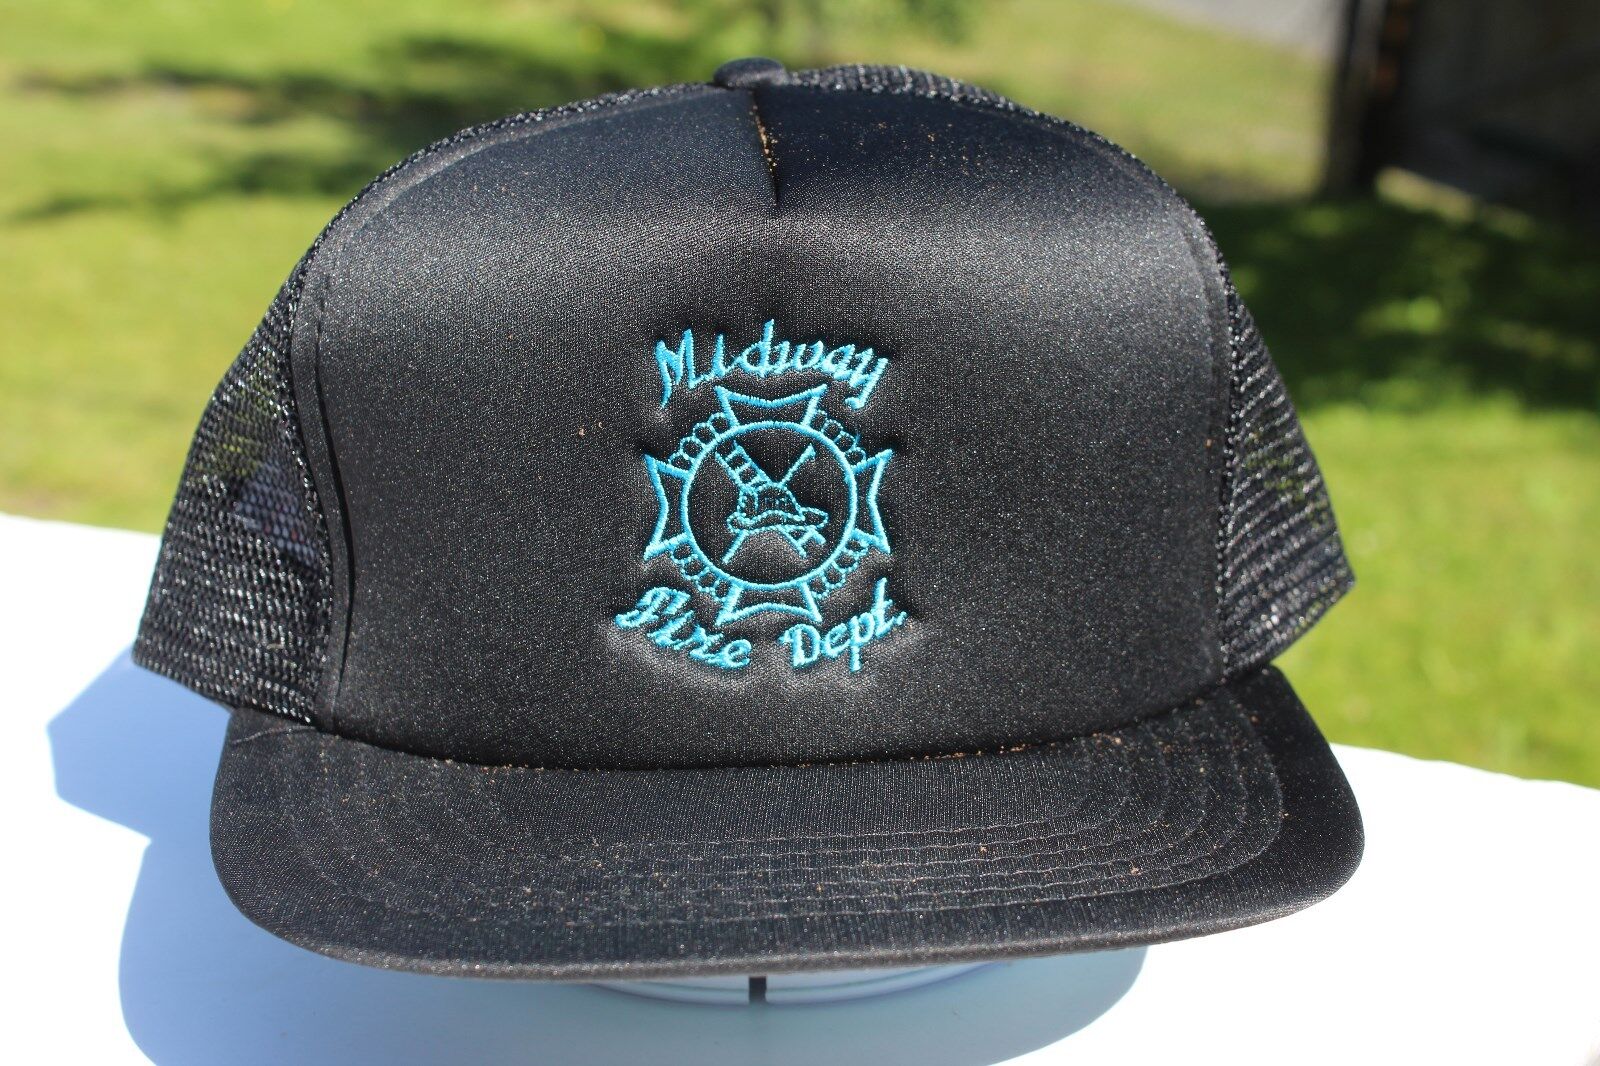 Ball Cap Hat - Midway Fire Department - British Columbia (h1977)